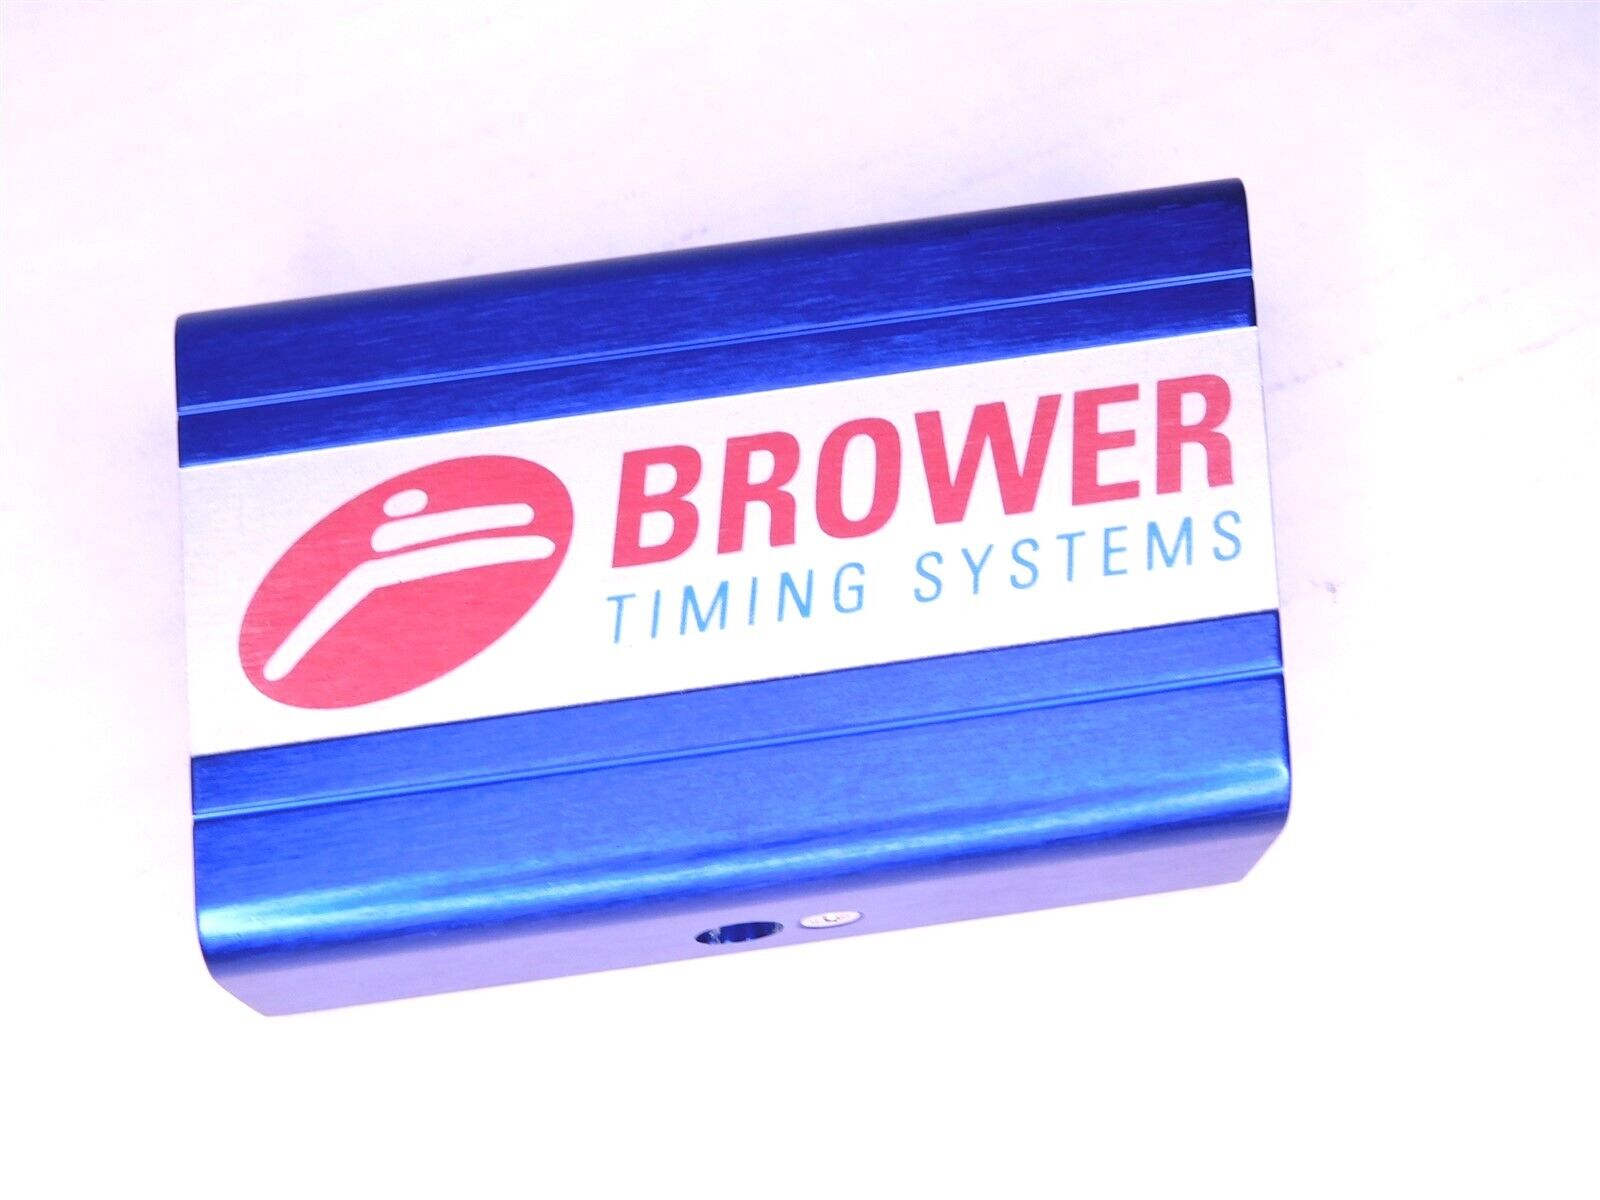 Brower Timing System Tc-gate B Photocell Module (only)